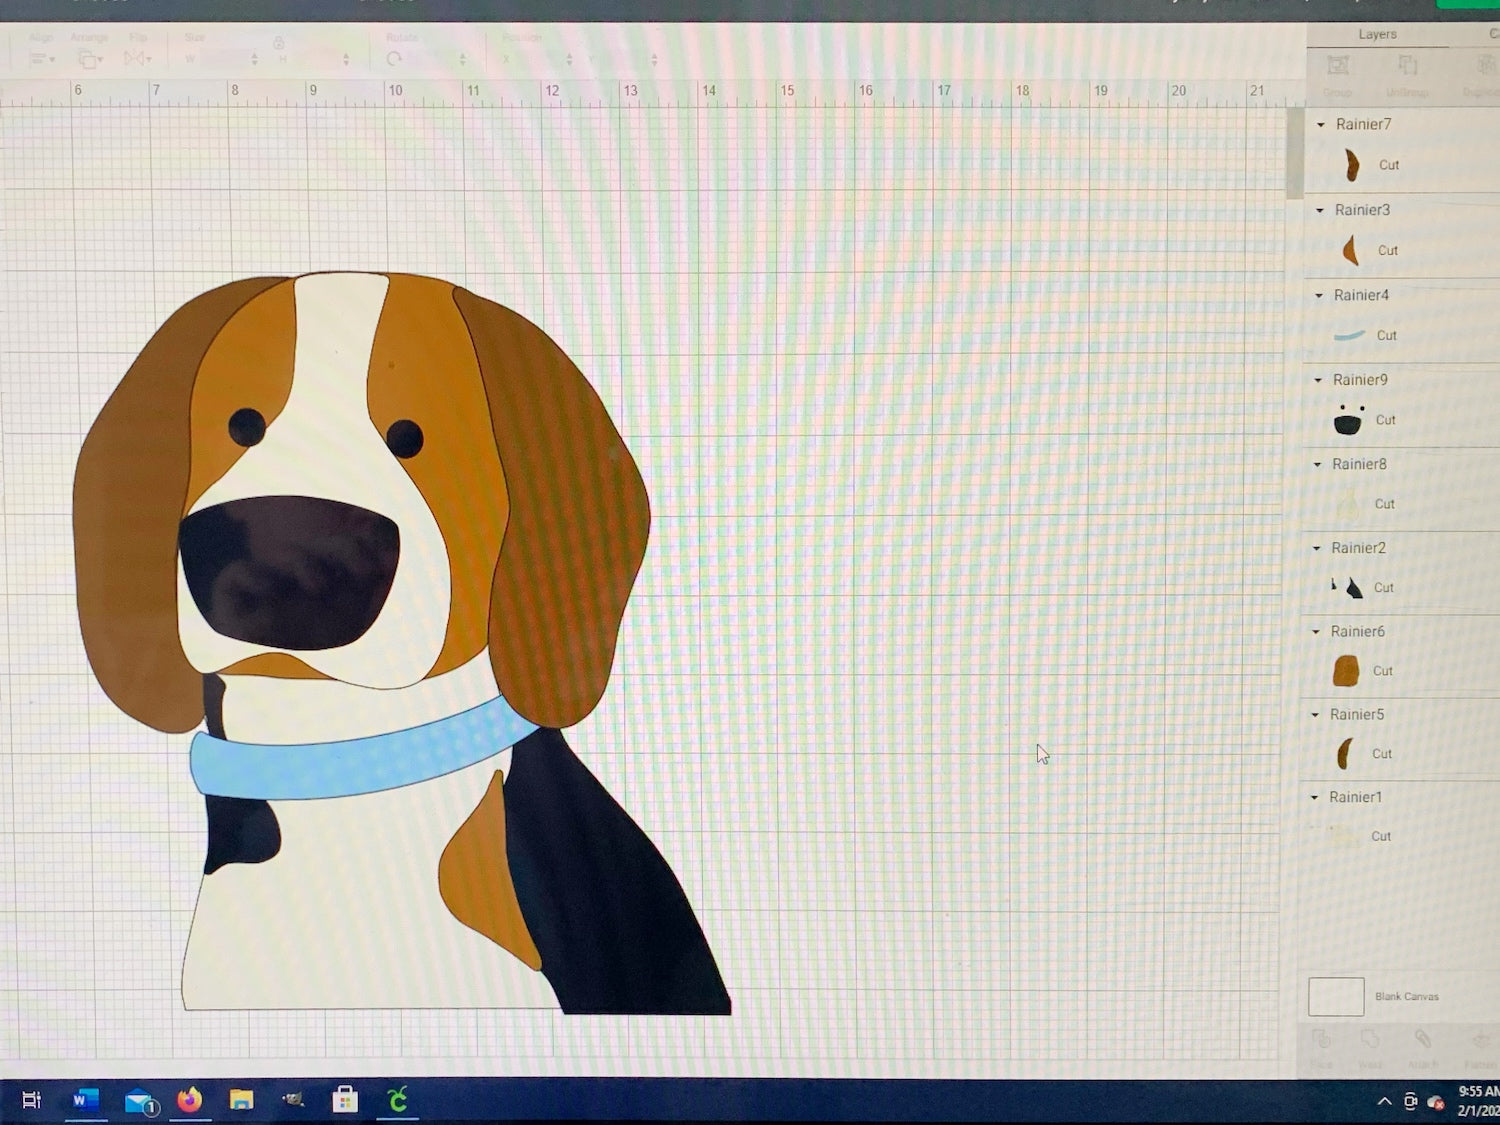 layers of dog portrait uploaded into Cricut Design Space